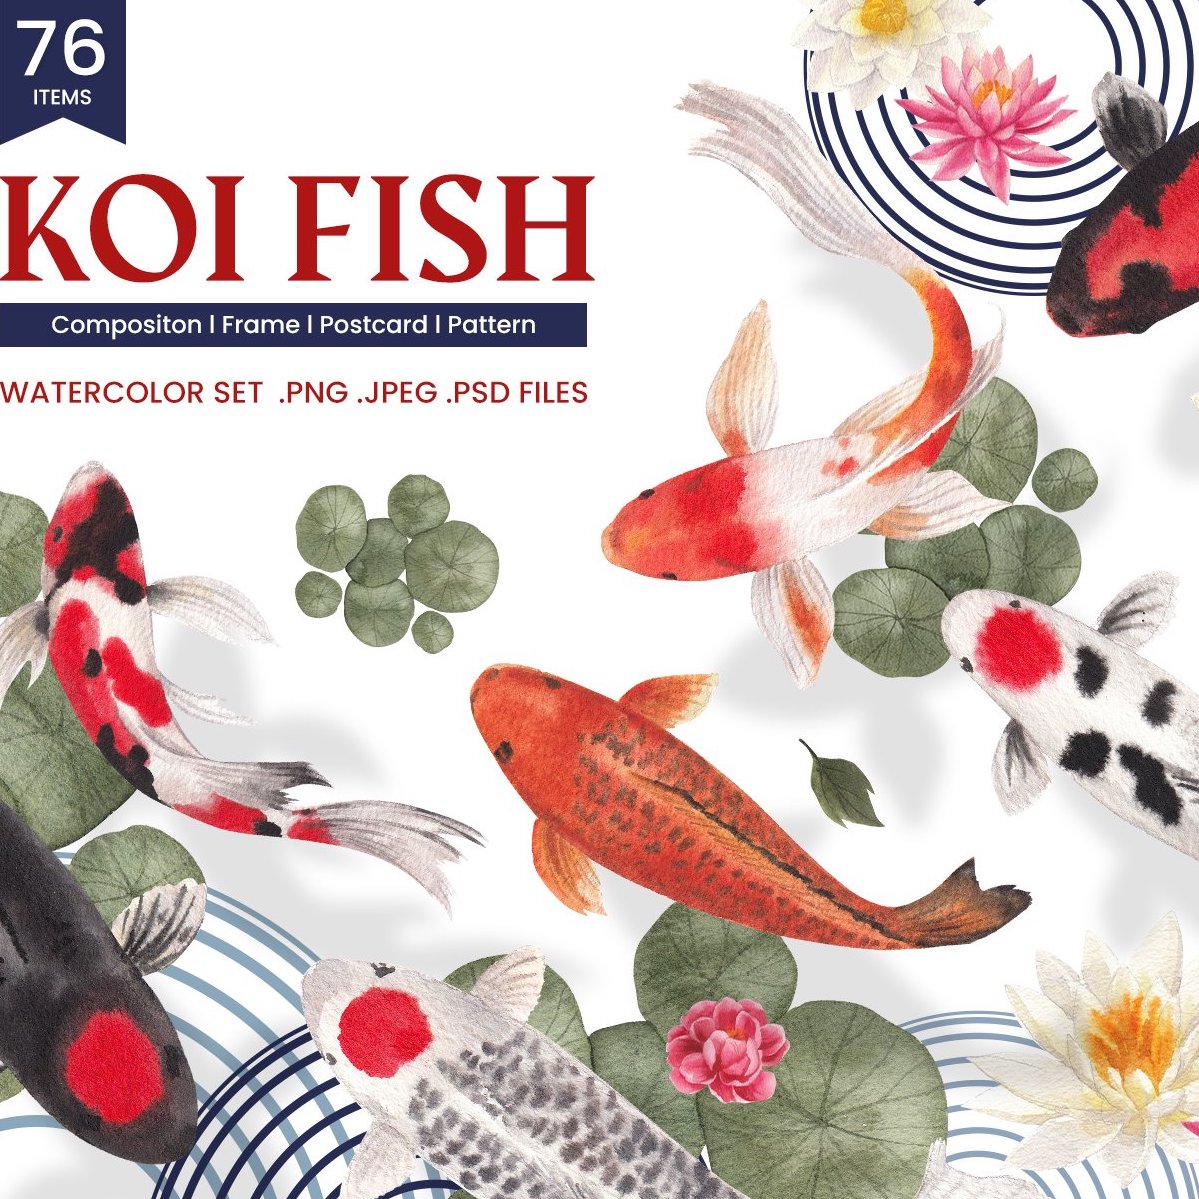 Koi Fishes Watercolor Illustration cover image.